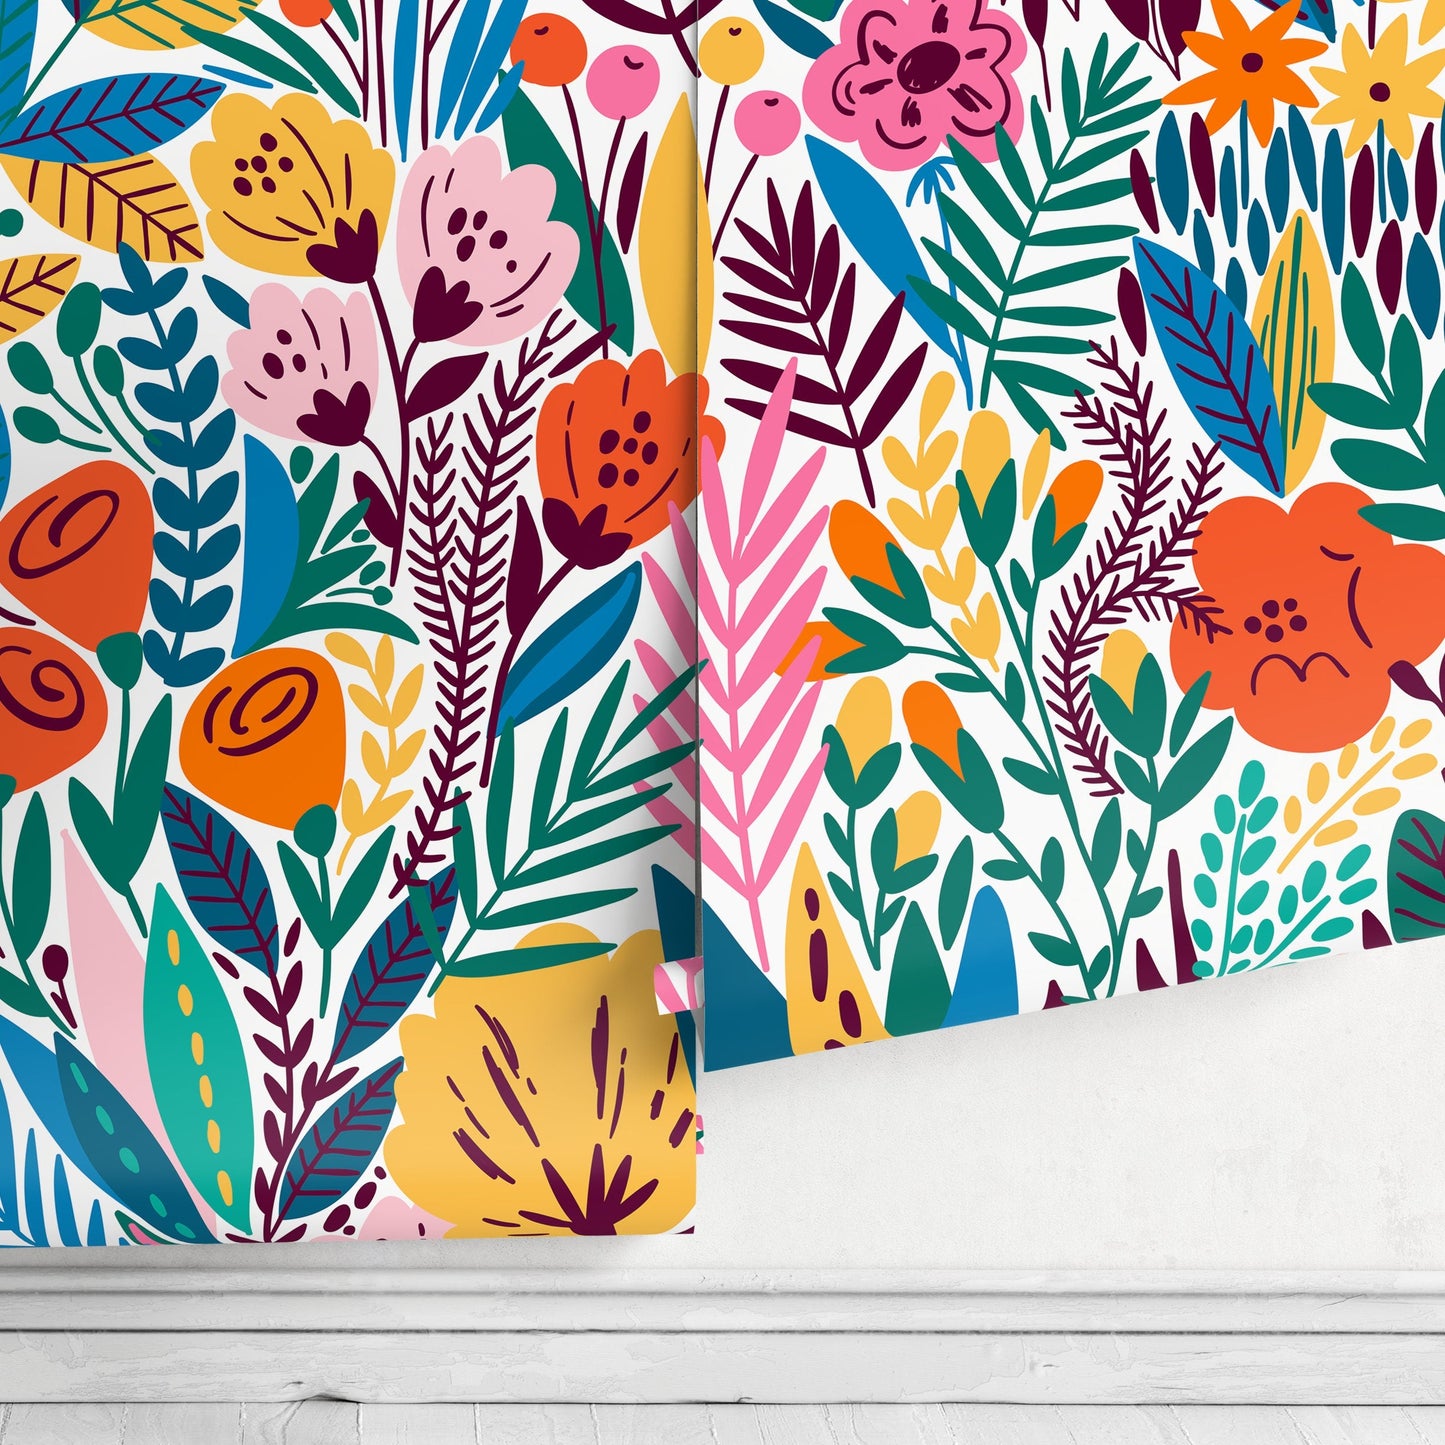 Peel and Stick Wallpaper Removable Wallpaper Scandinavian Wallpaper Floral Wallpaper Peel and Stick Wallpaper Wall Paper - A613